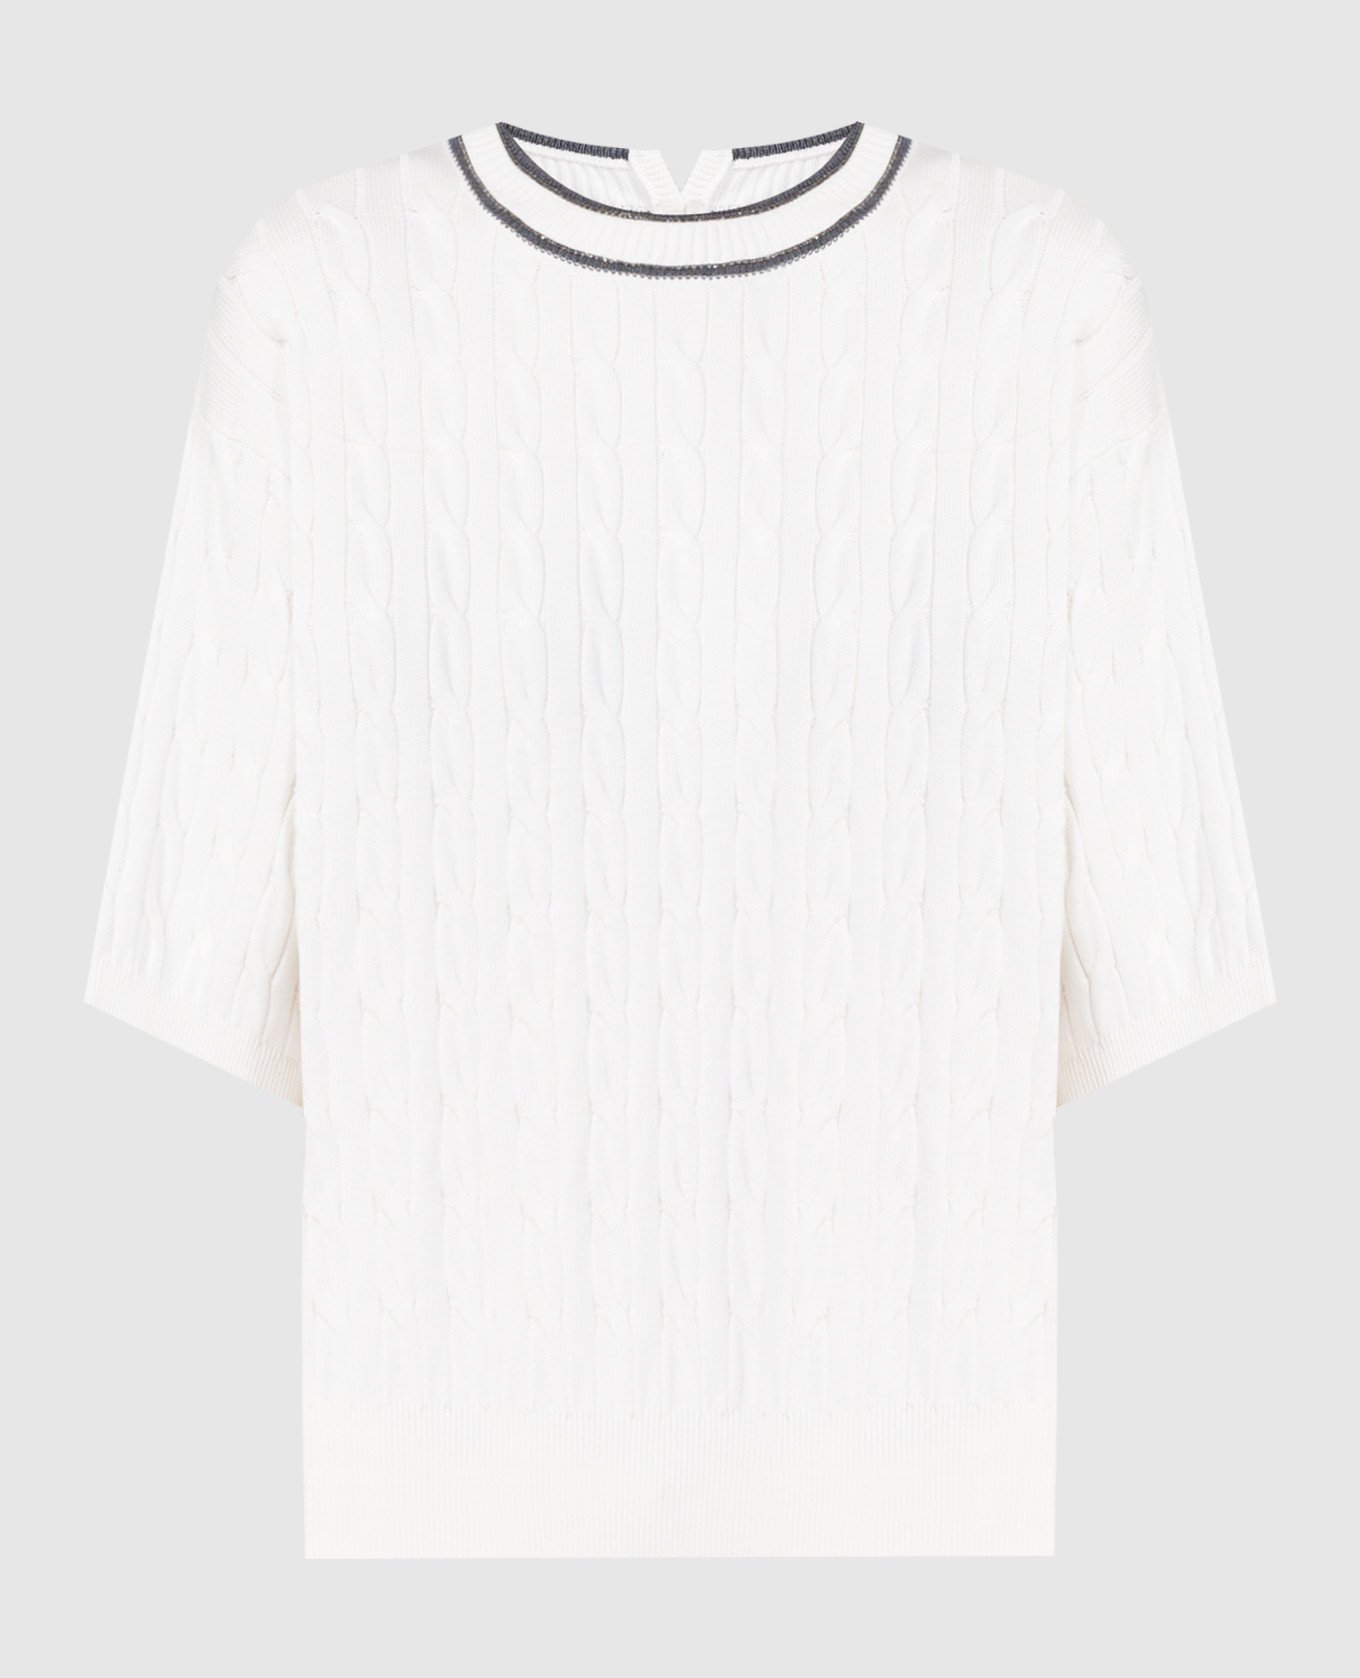 White t-shirt in a textured pattern with a monil chain